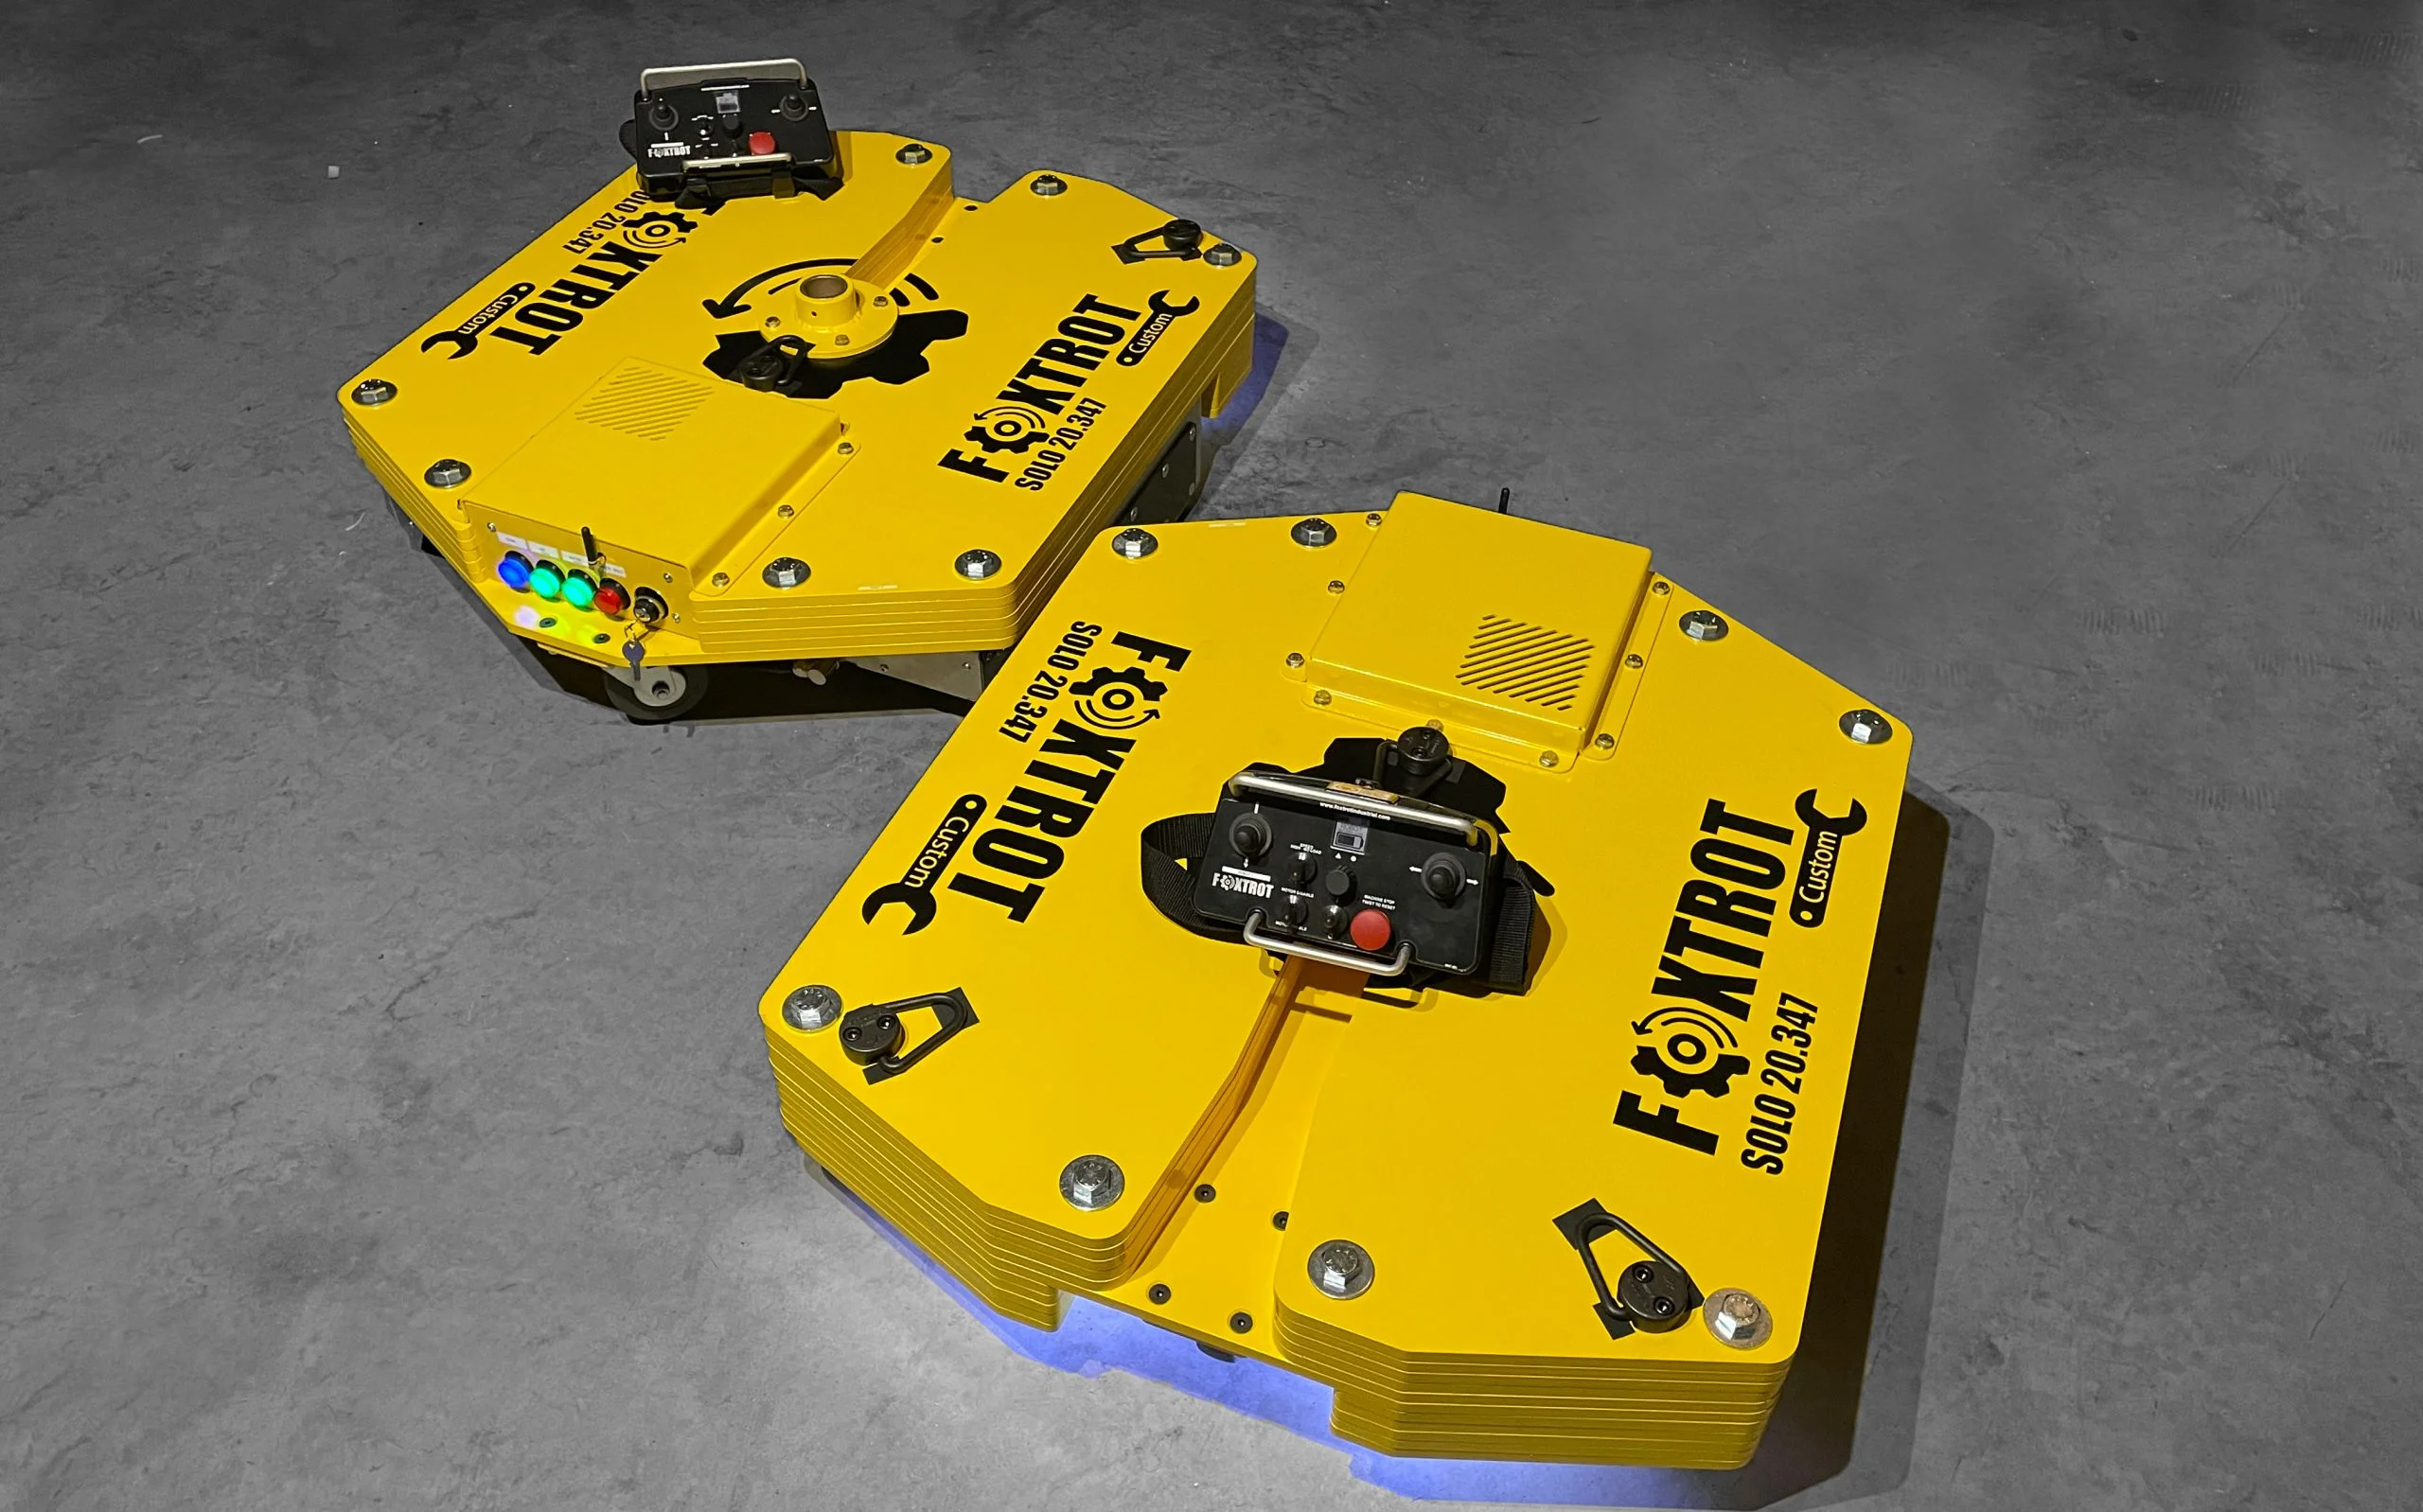 2 custom yellow foxtrot robots with the remote control on top